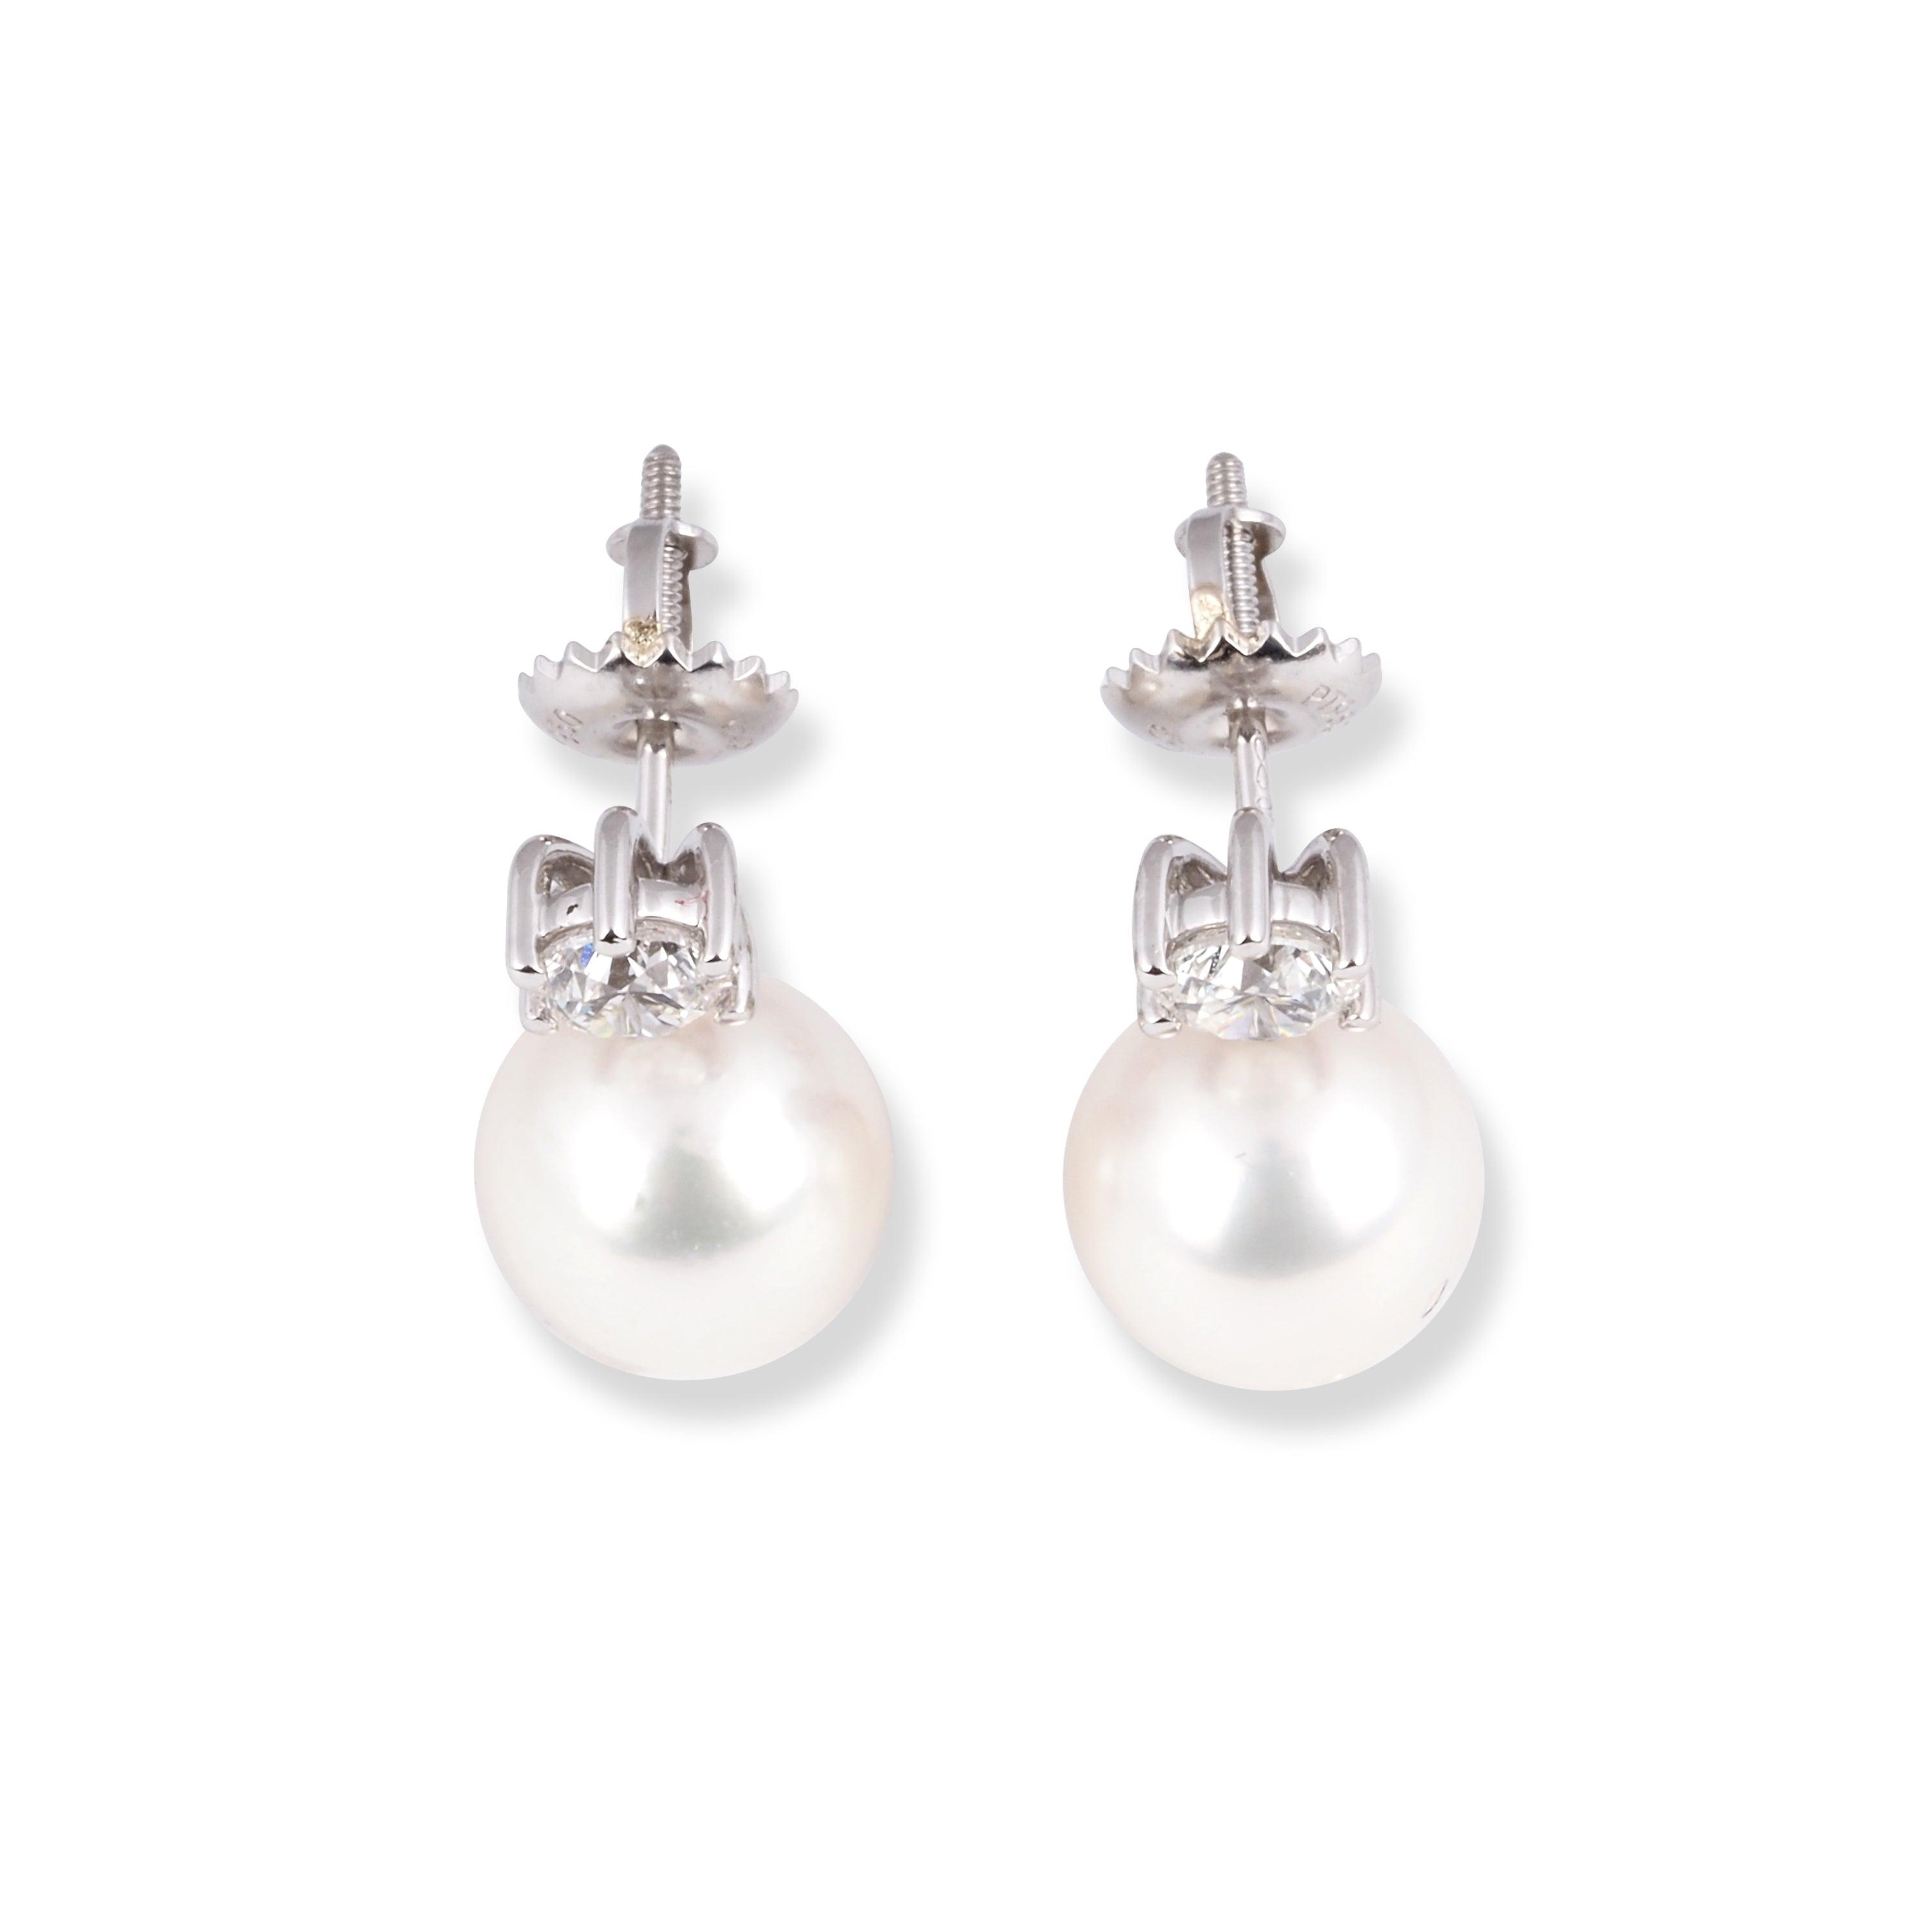 18ct White Gold Diamond and Cultured Pearl Earrings EC53549-2 - Minar Jewellers